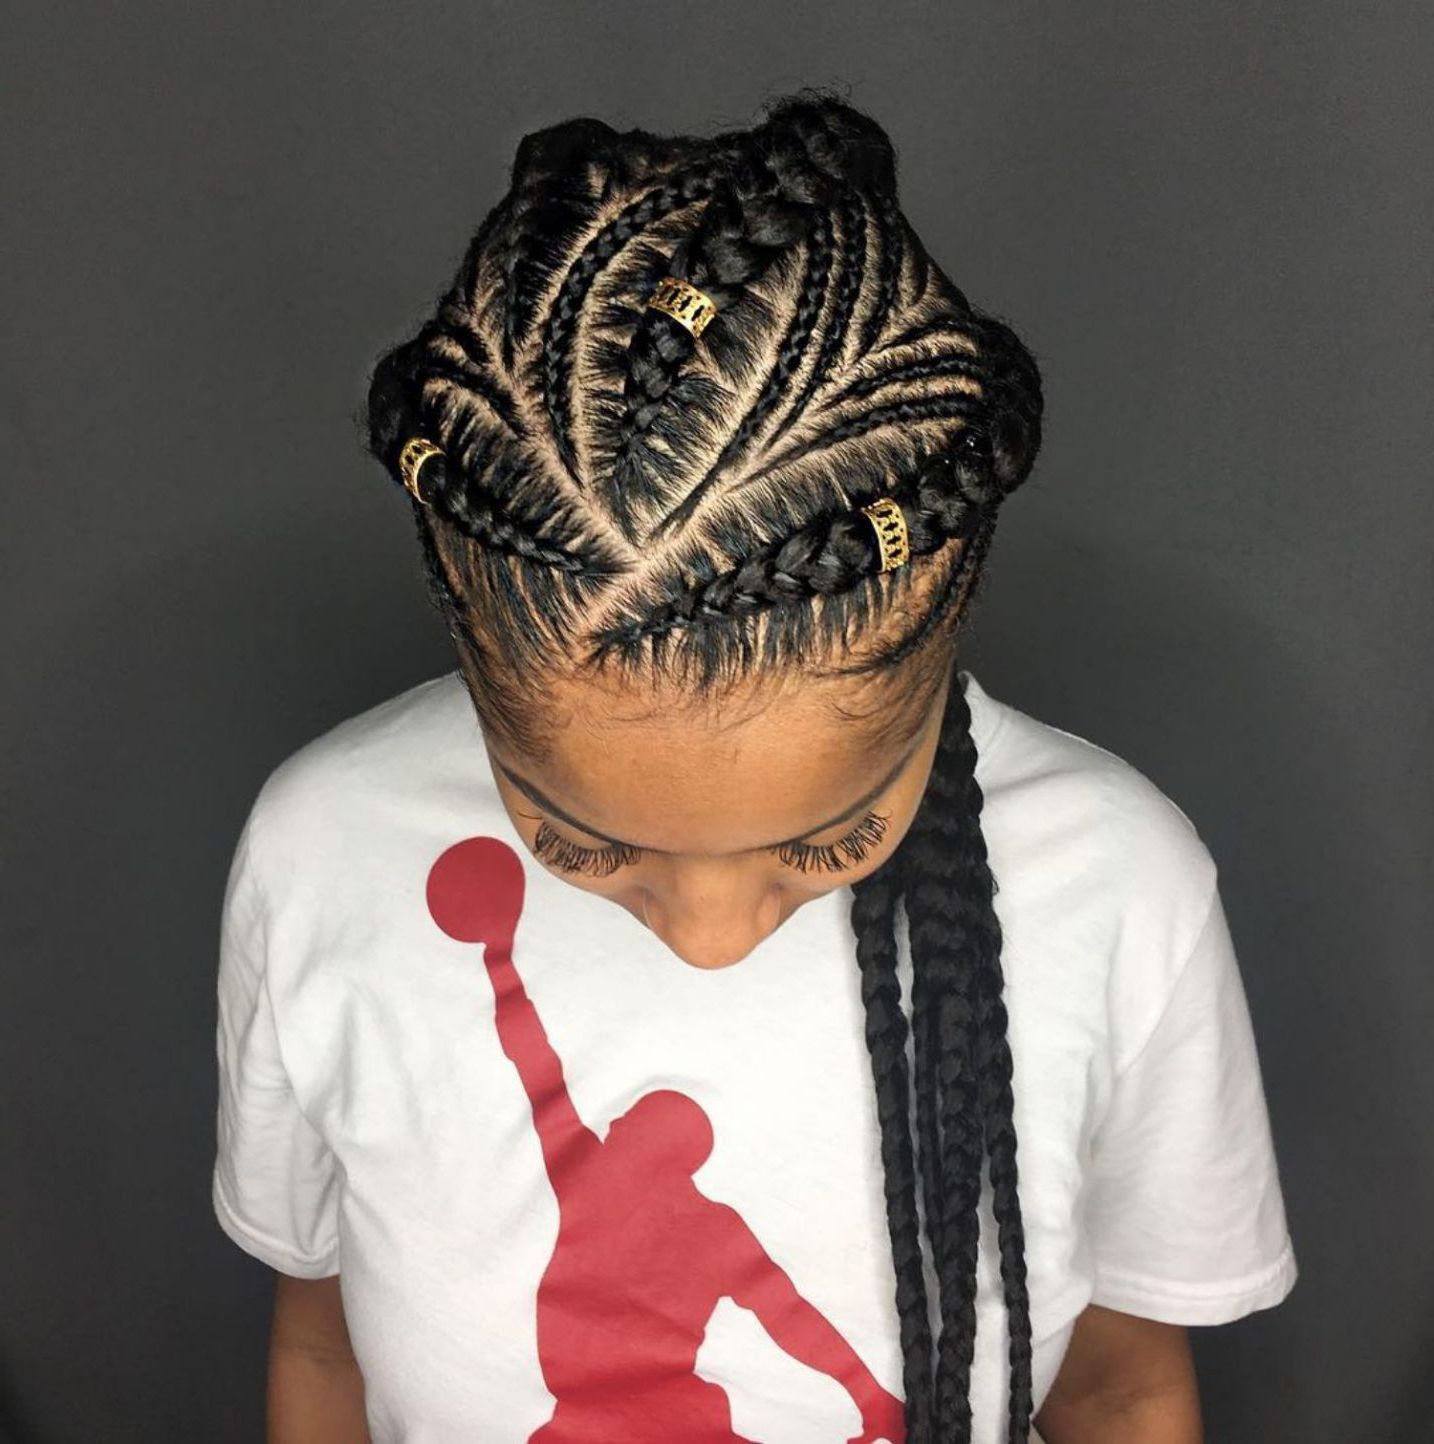 2020 Ponytail Braid Hairstyles With Thin And Thick Cornrows Inside 60 Easy And Showy Protective Hairstyles For Natural Hair (View 5 of 20)